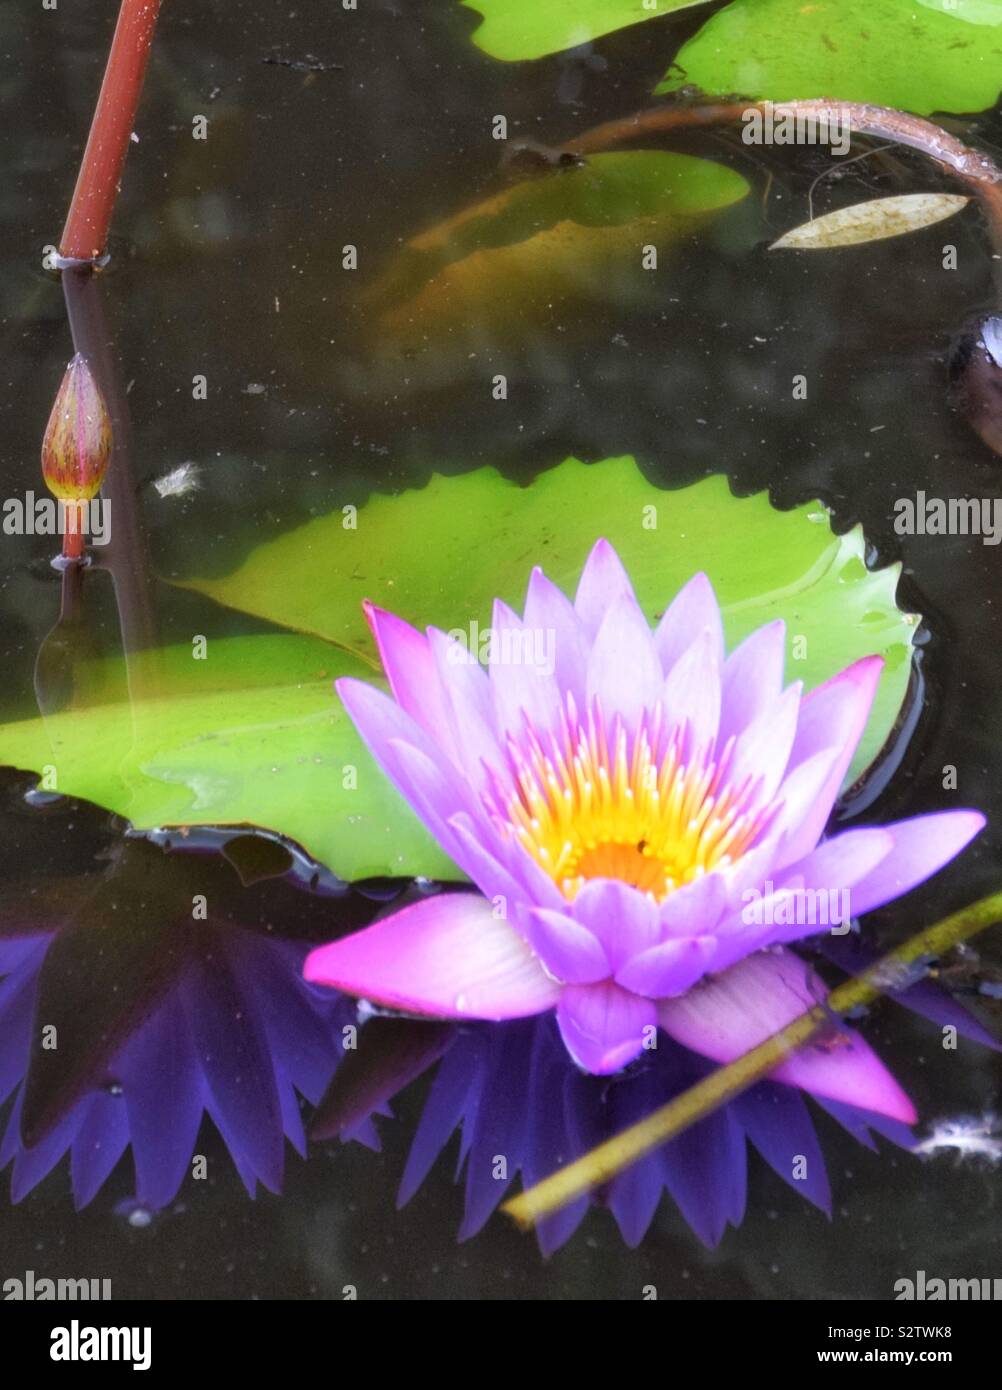 Water Lilly flower on murky pond Stock Photo